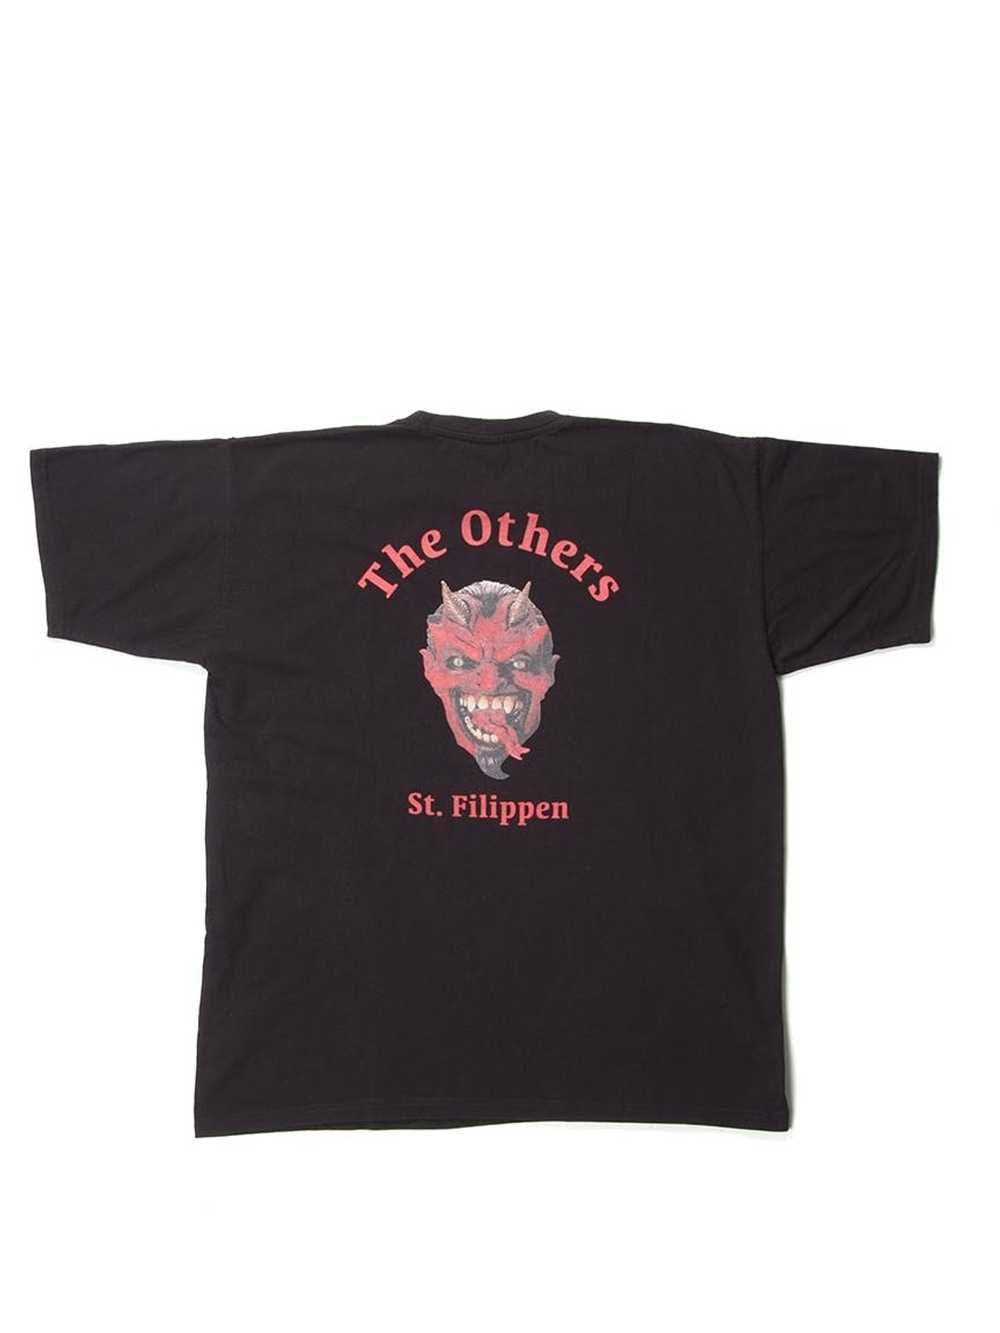 Band Tees × Movie × Rap Tees Vintage The Others S… - image 1